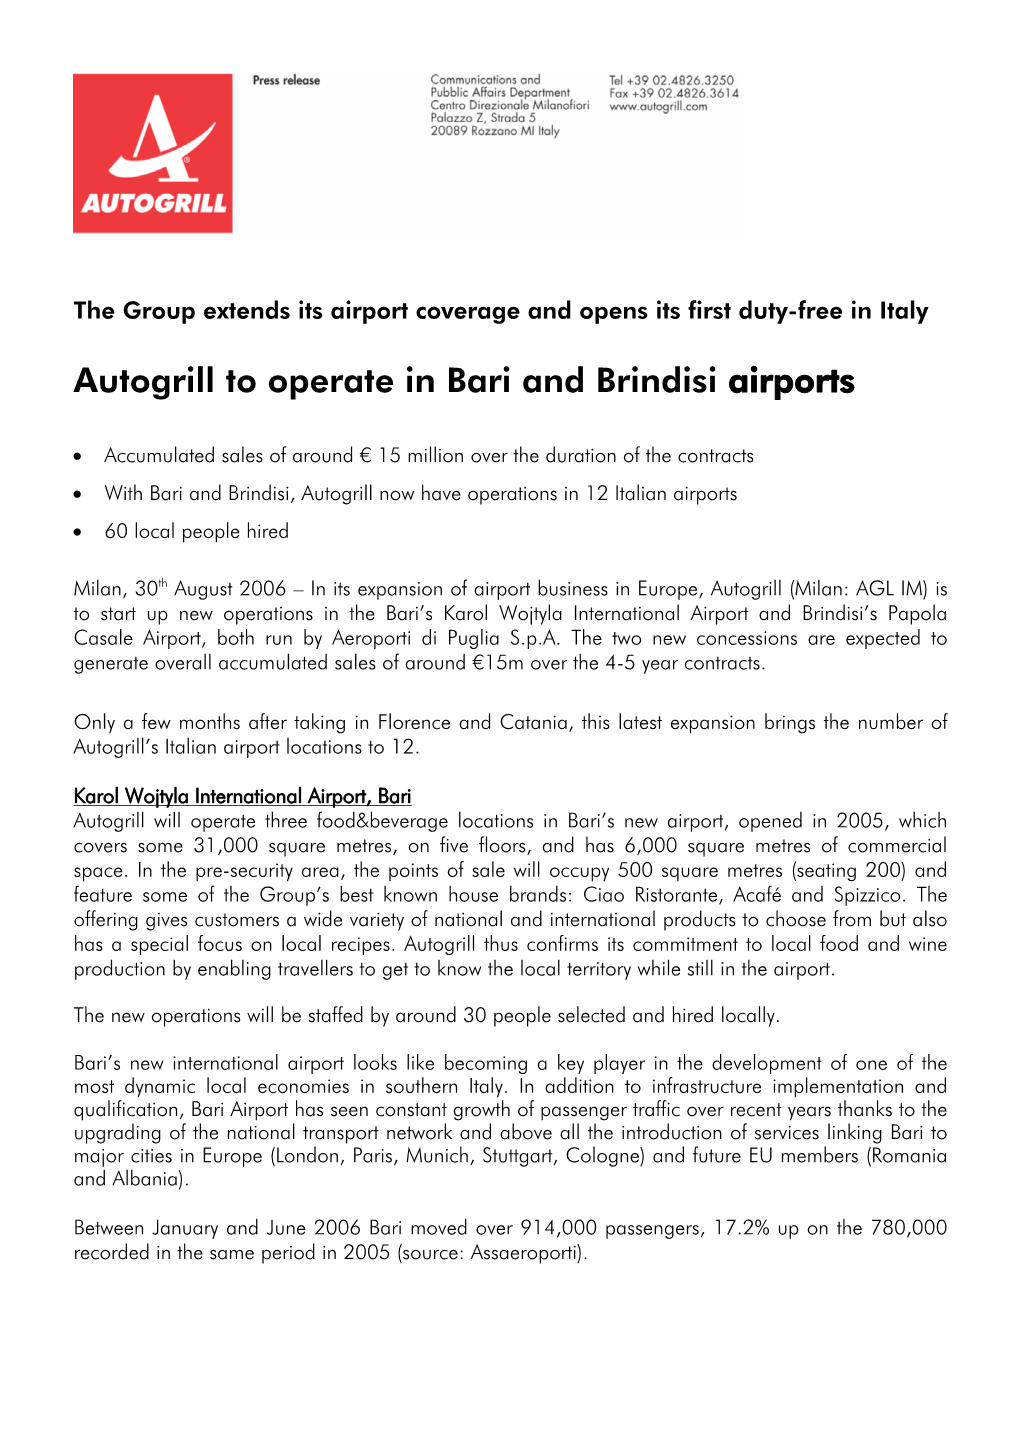 Autogrill to Operate in Bari and Brindisi Airports